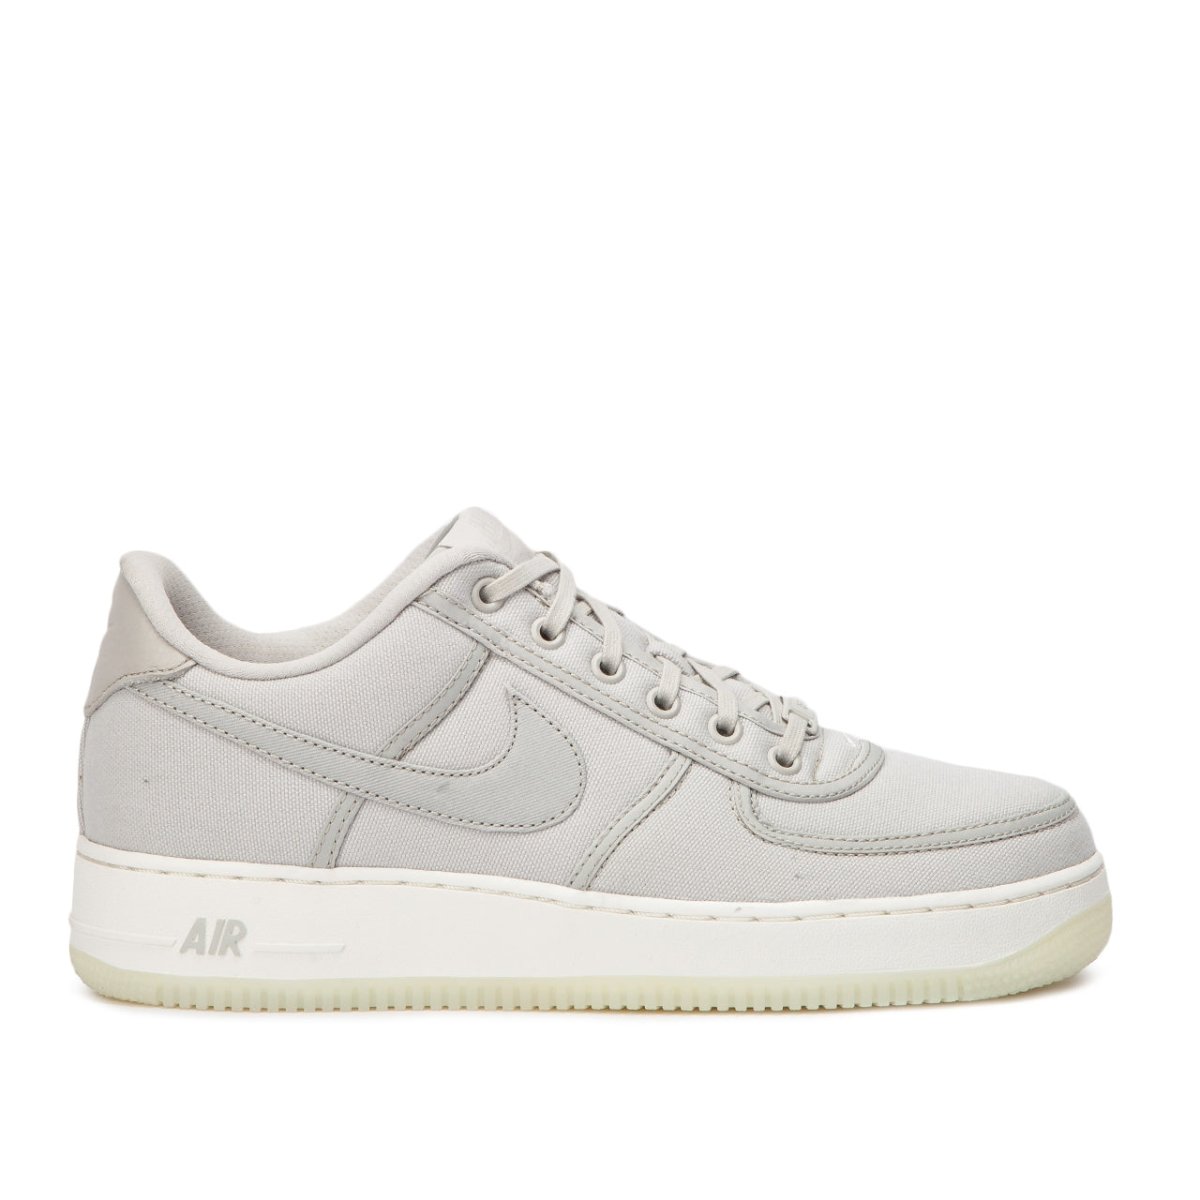 Nike Air Force 1 Low Retro QS Canvas (Beige)  - Allike Store